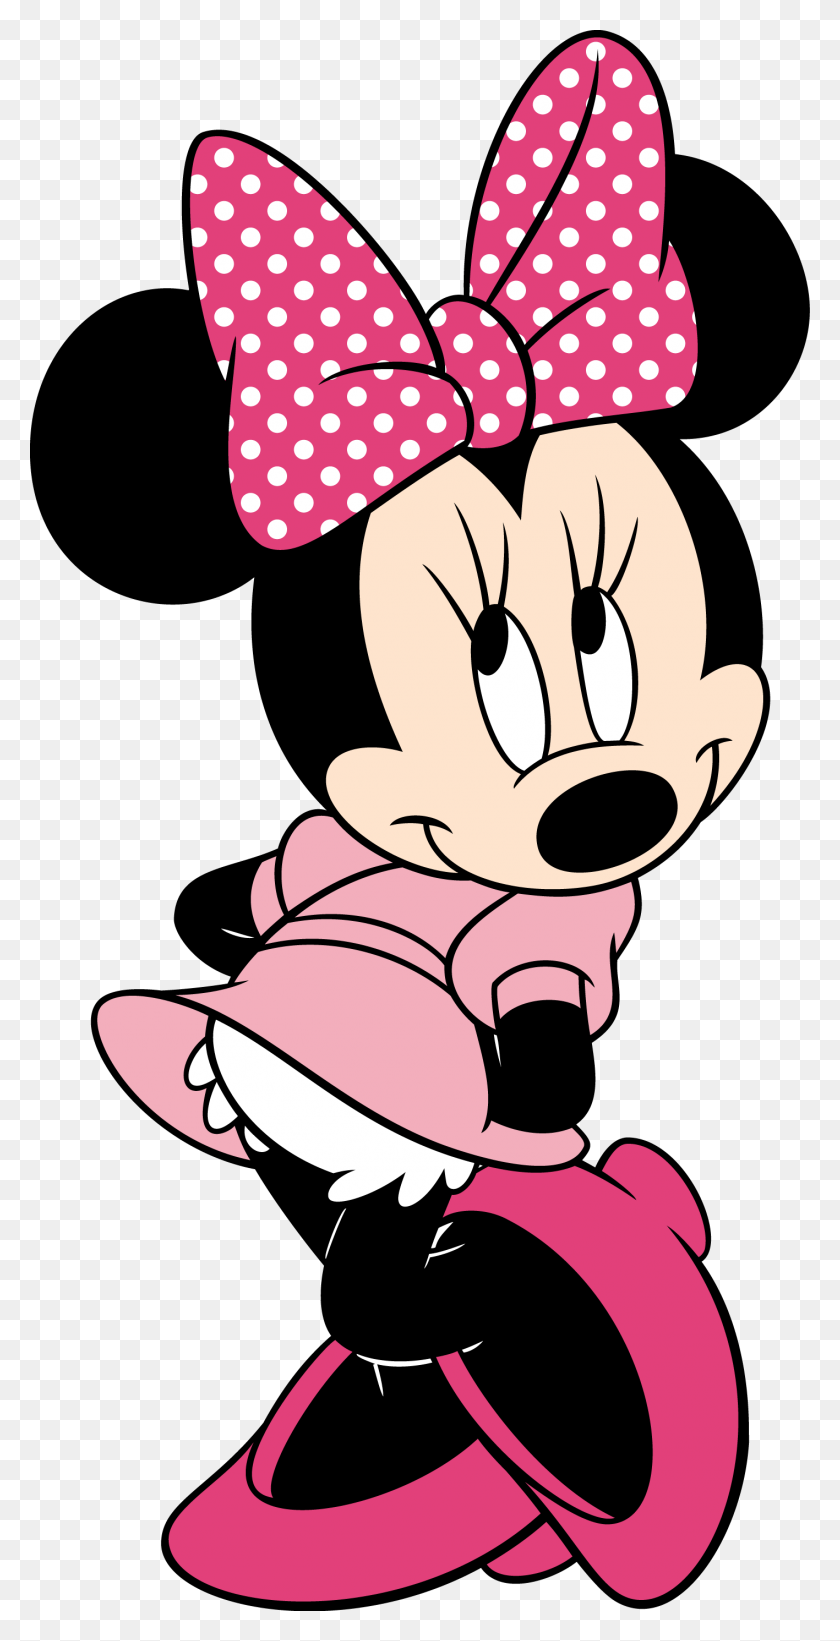 Download Mickey Mouse Png Images Free Download - Baby Minnie Mouse ...